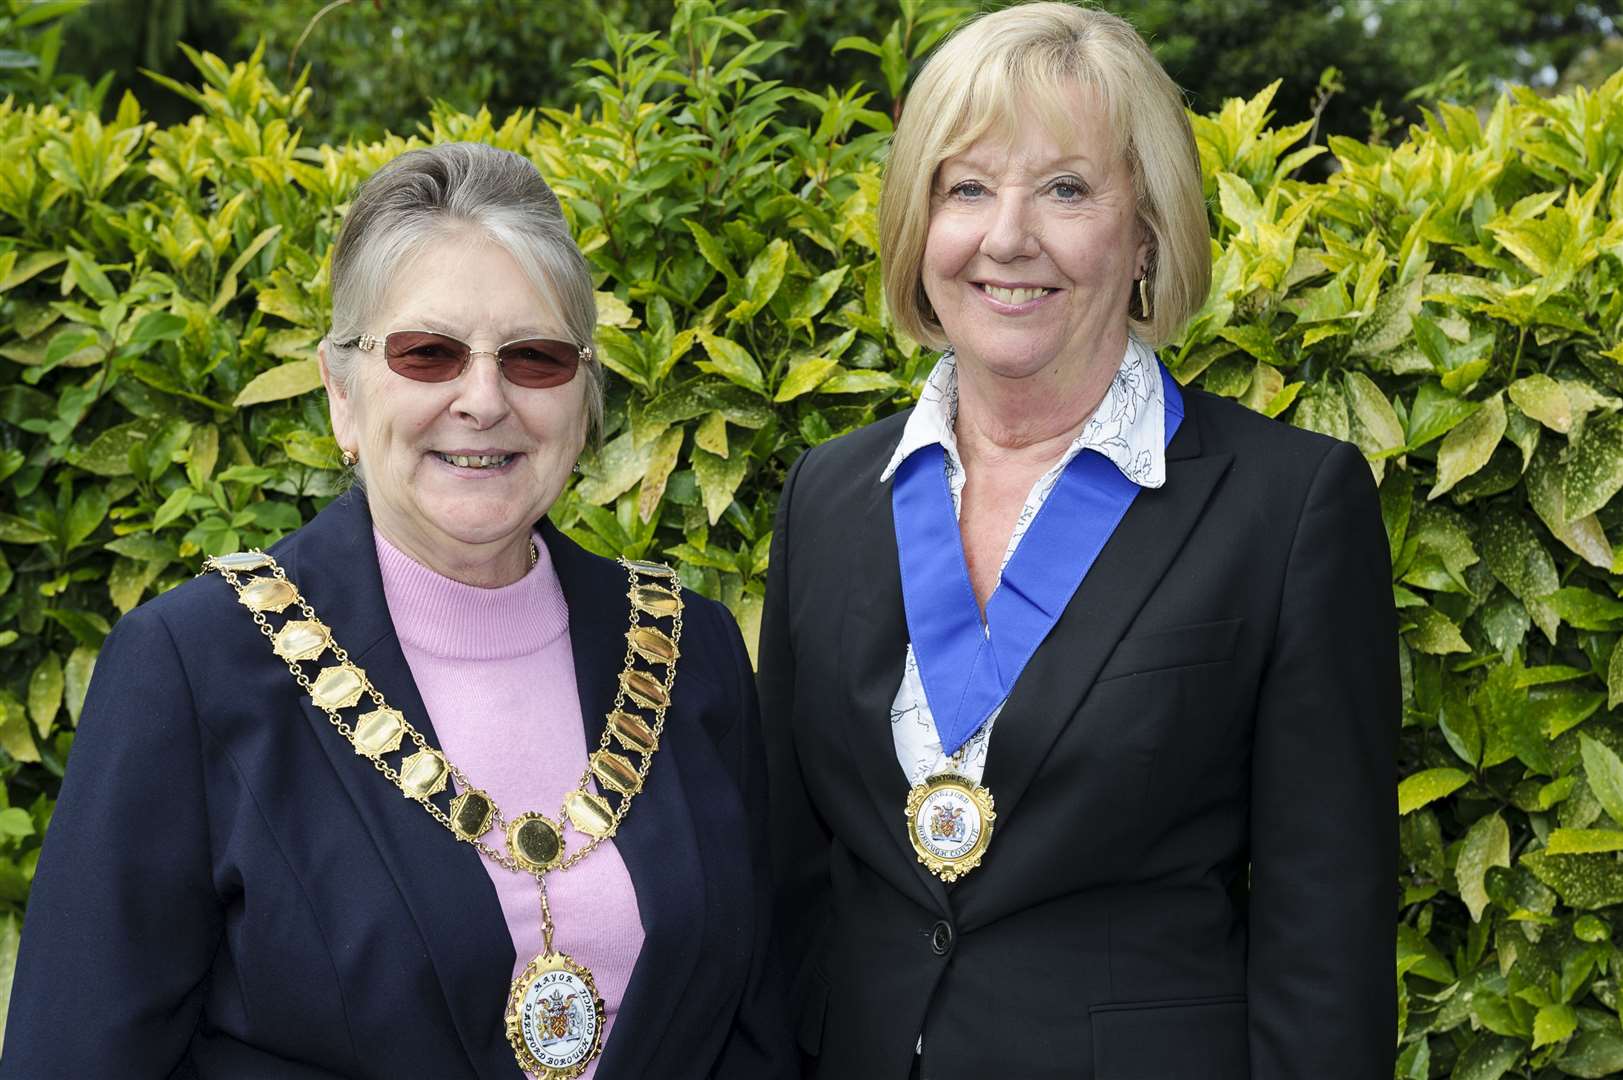 Cllr Rosanna Currans, the newly elected mayor of Dartford, with mayor's escort Corinna Bailey, right. Picture: Andy Payton